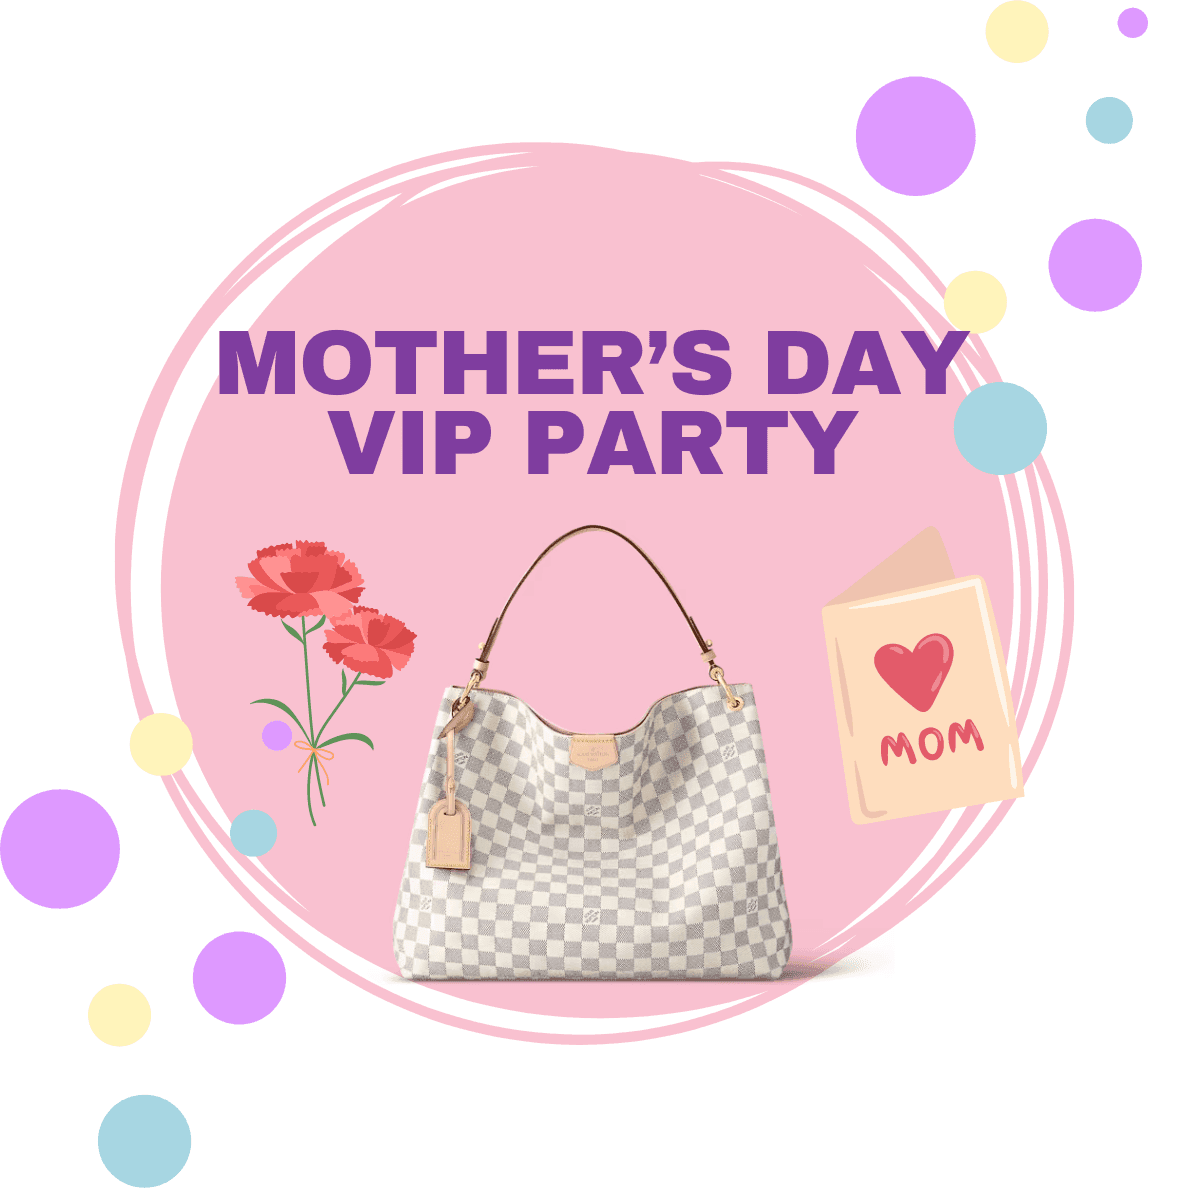 Mother’s Day VIP Party (Louis Vuitton Bag Sweepstakes)